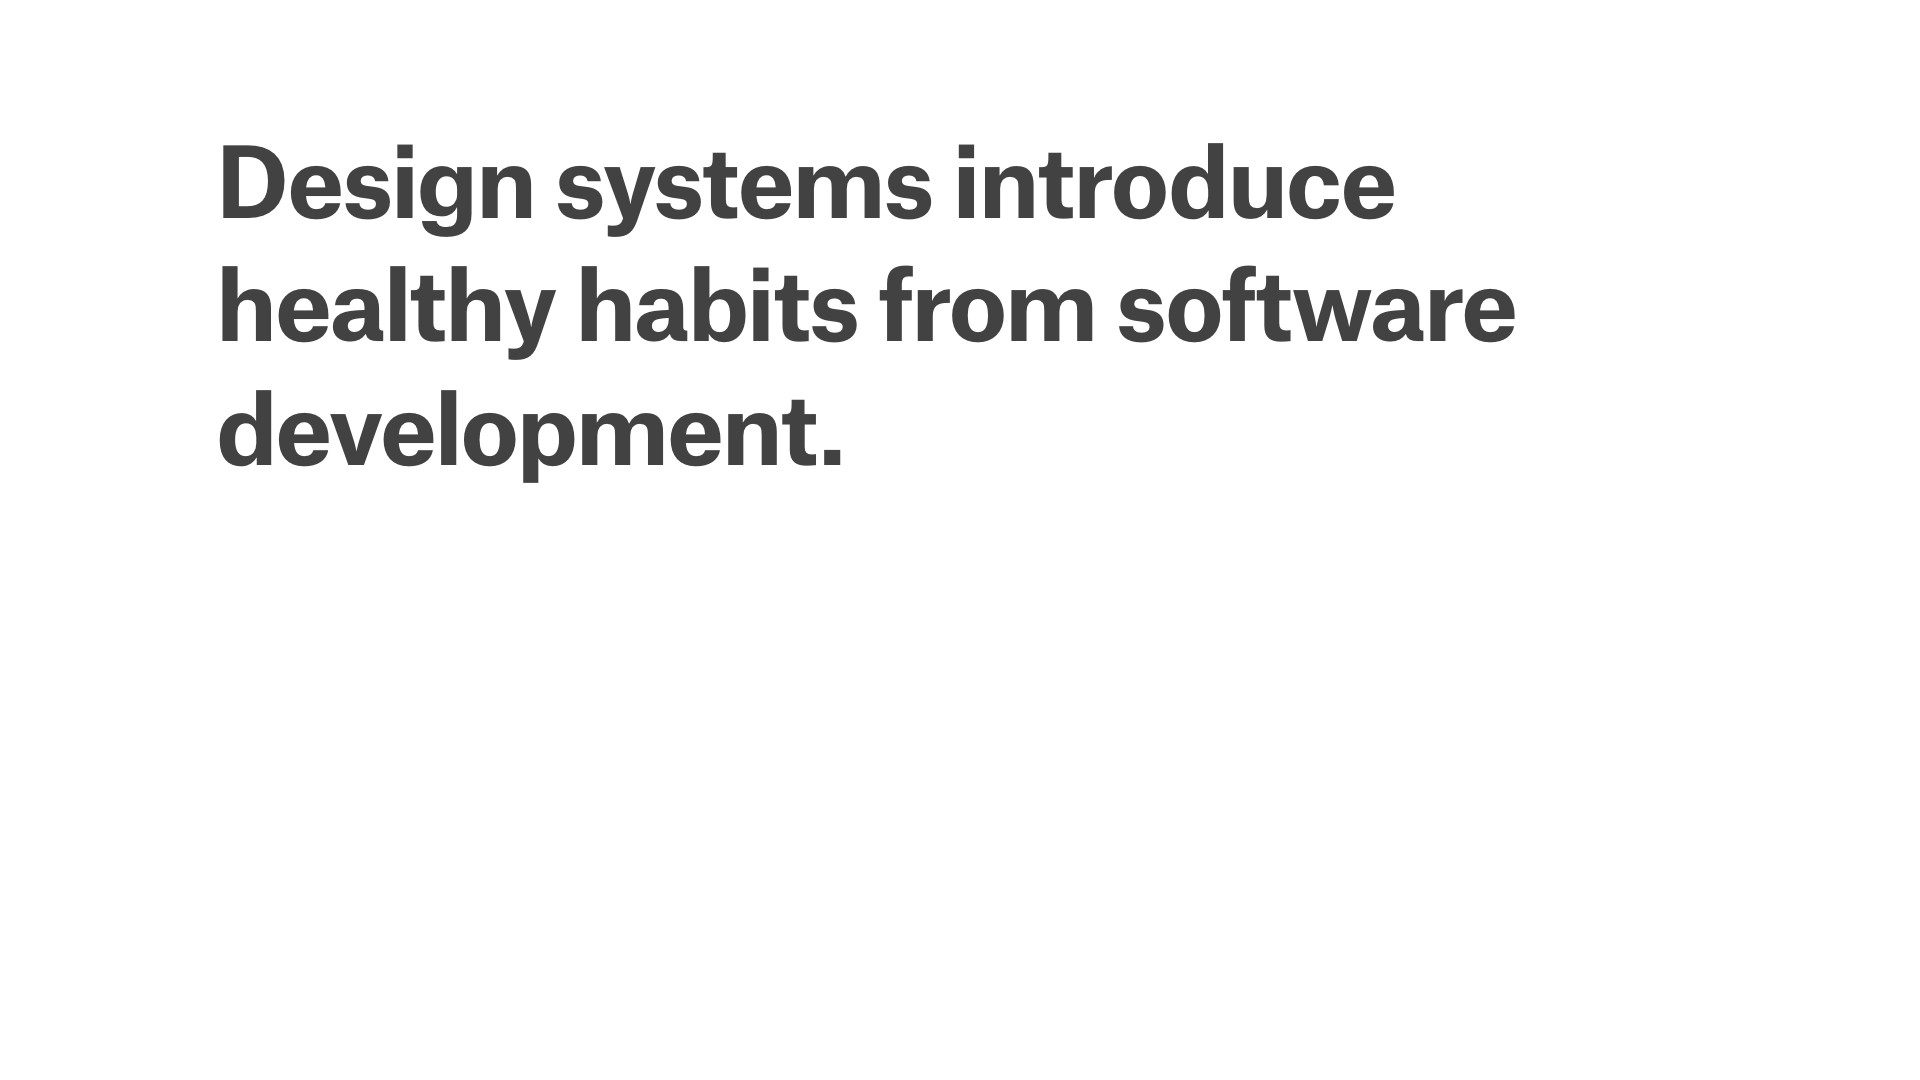 Design systems introduce habits from software development.